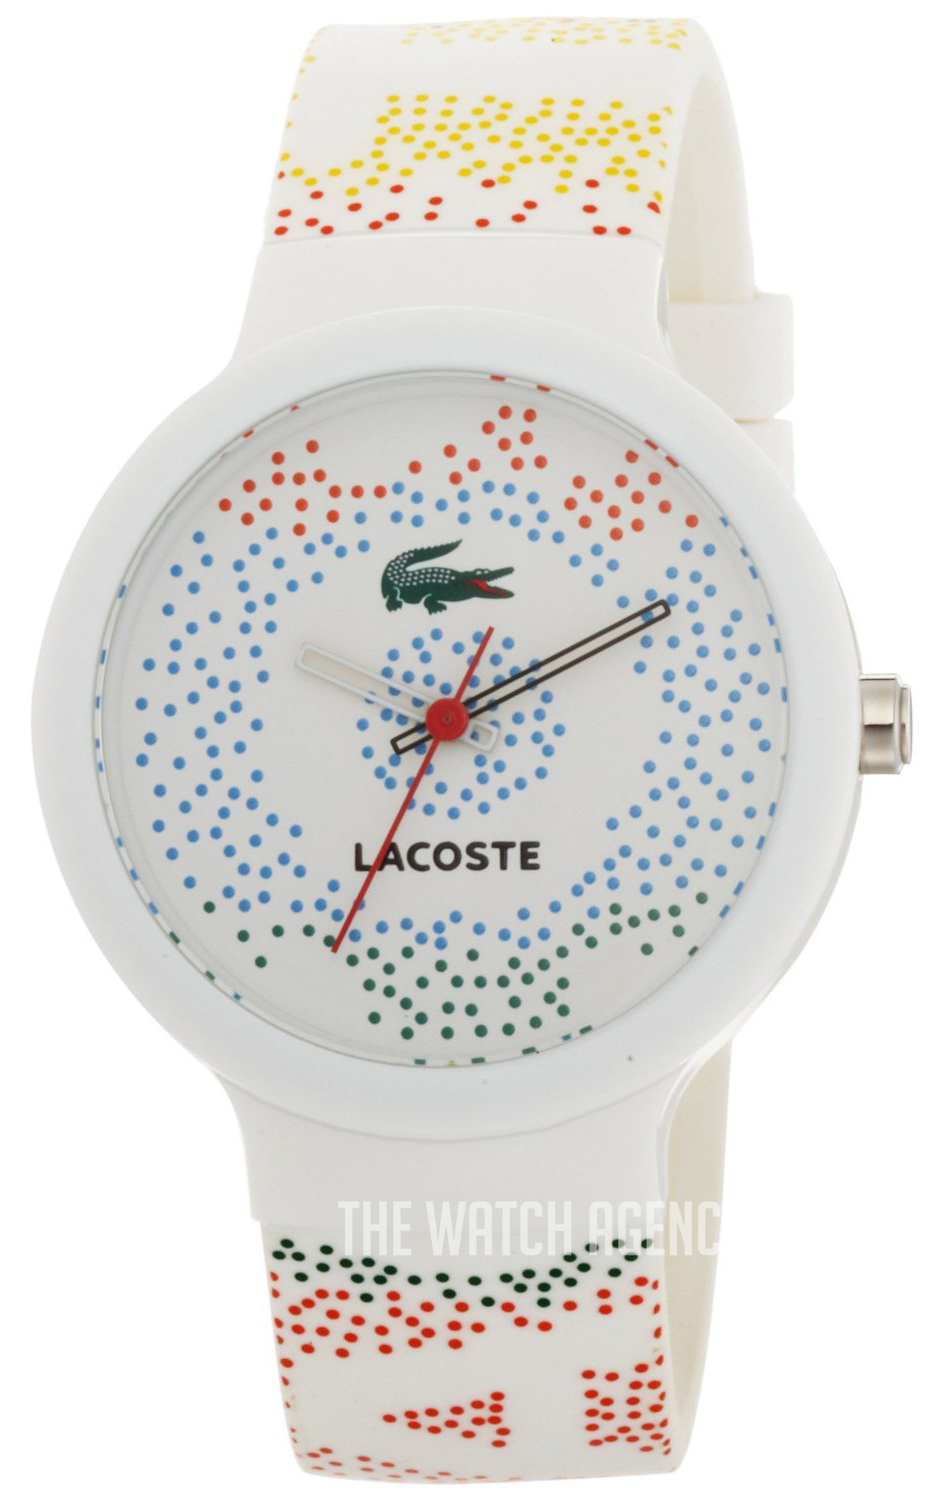 2010531 Lacoste | TheWatchAgency™